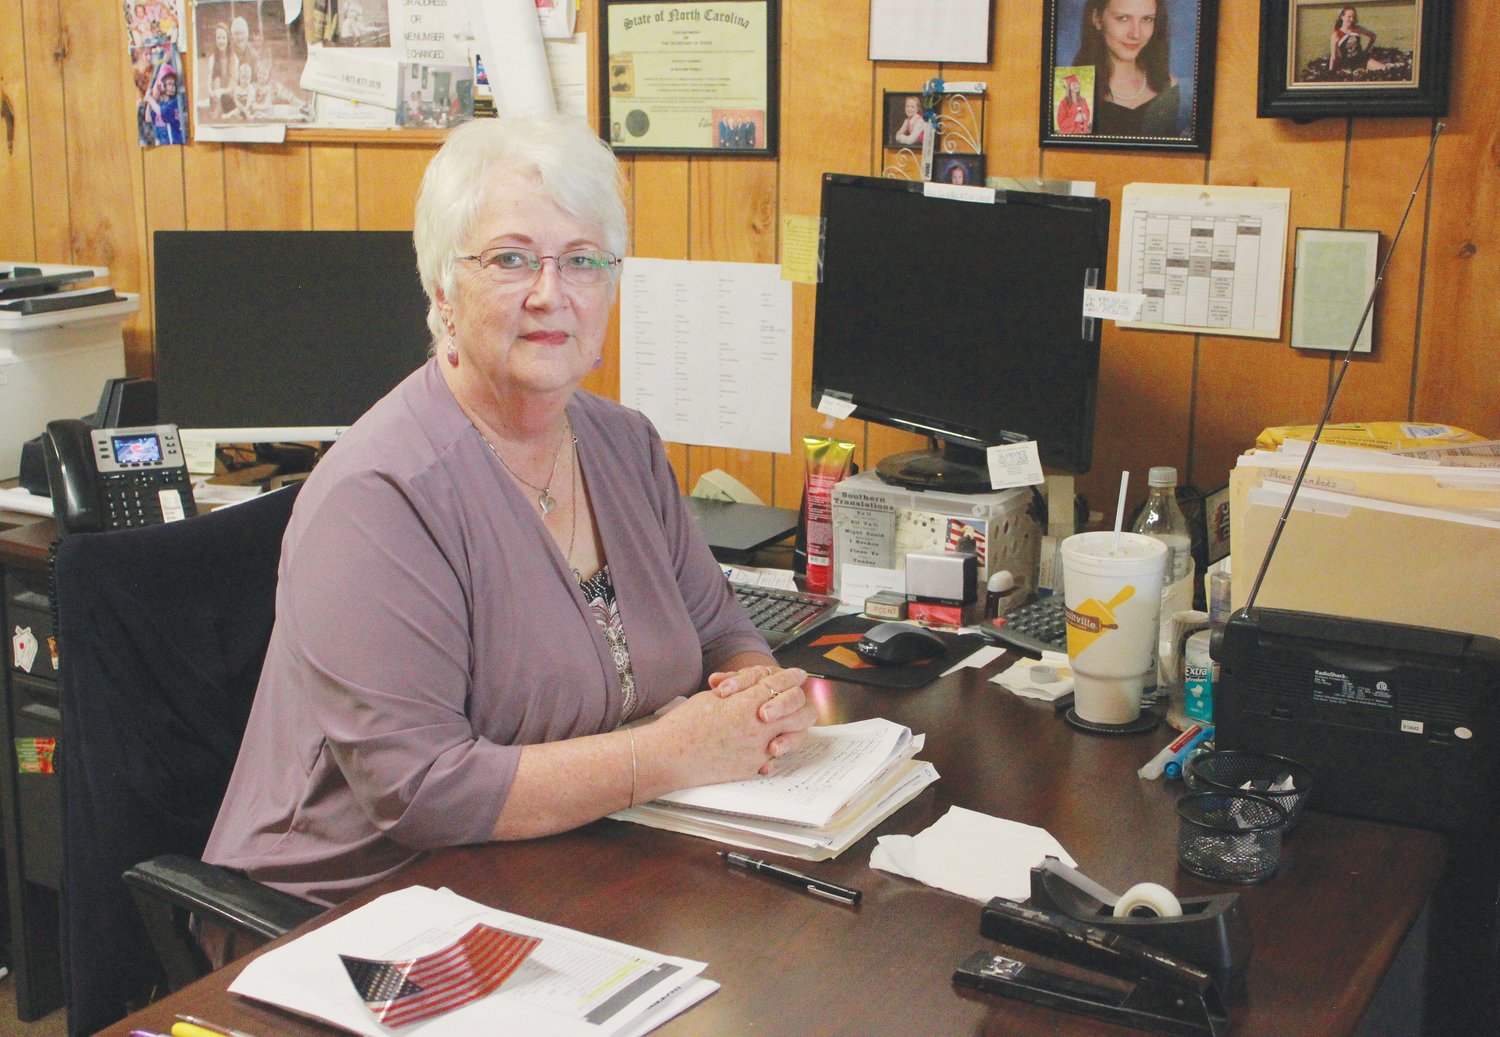 Pat Hackney is celebrating her 40th anniversary as an account manager at Chatham County Insurors in downtown Siler City.